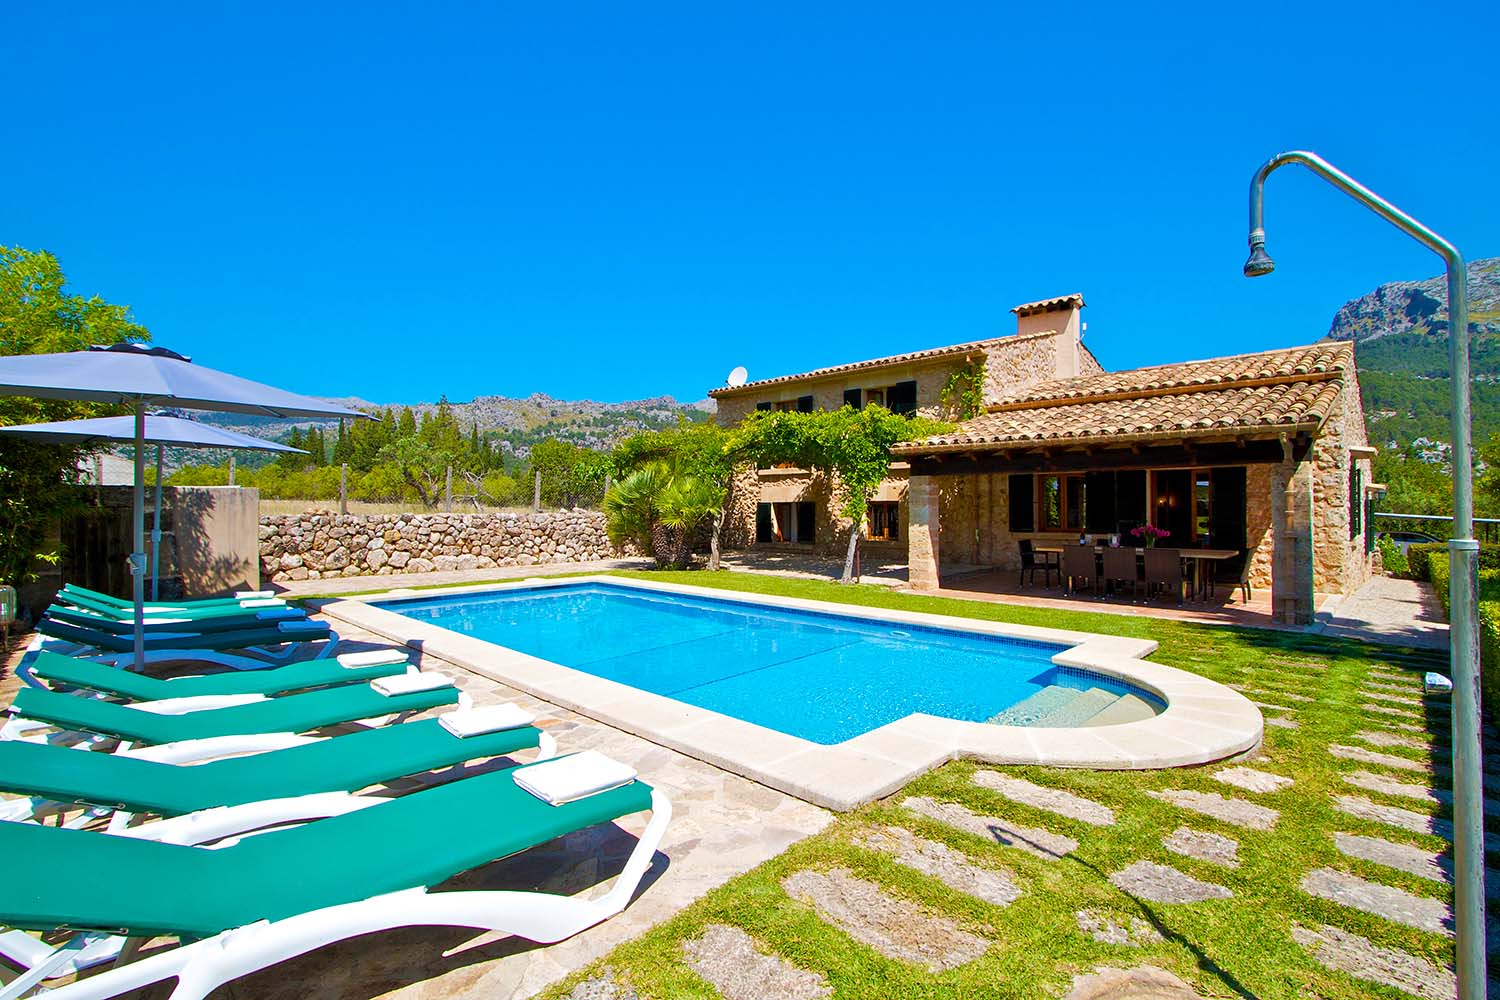 Can Peric is a comfortable villa in a quiet location by Pollensa